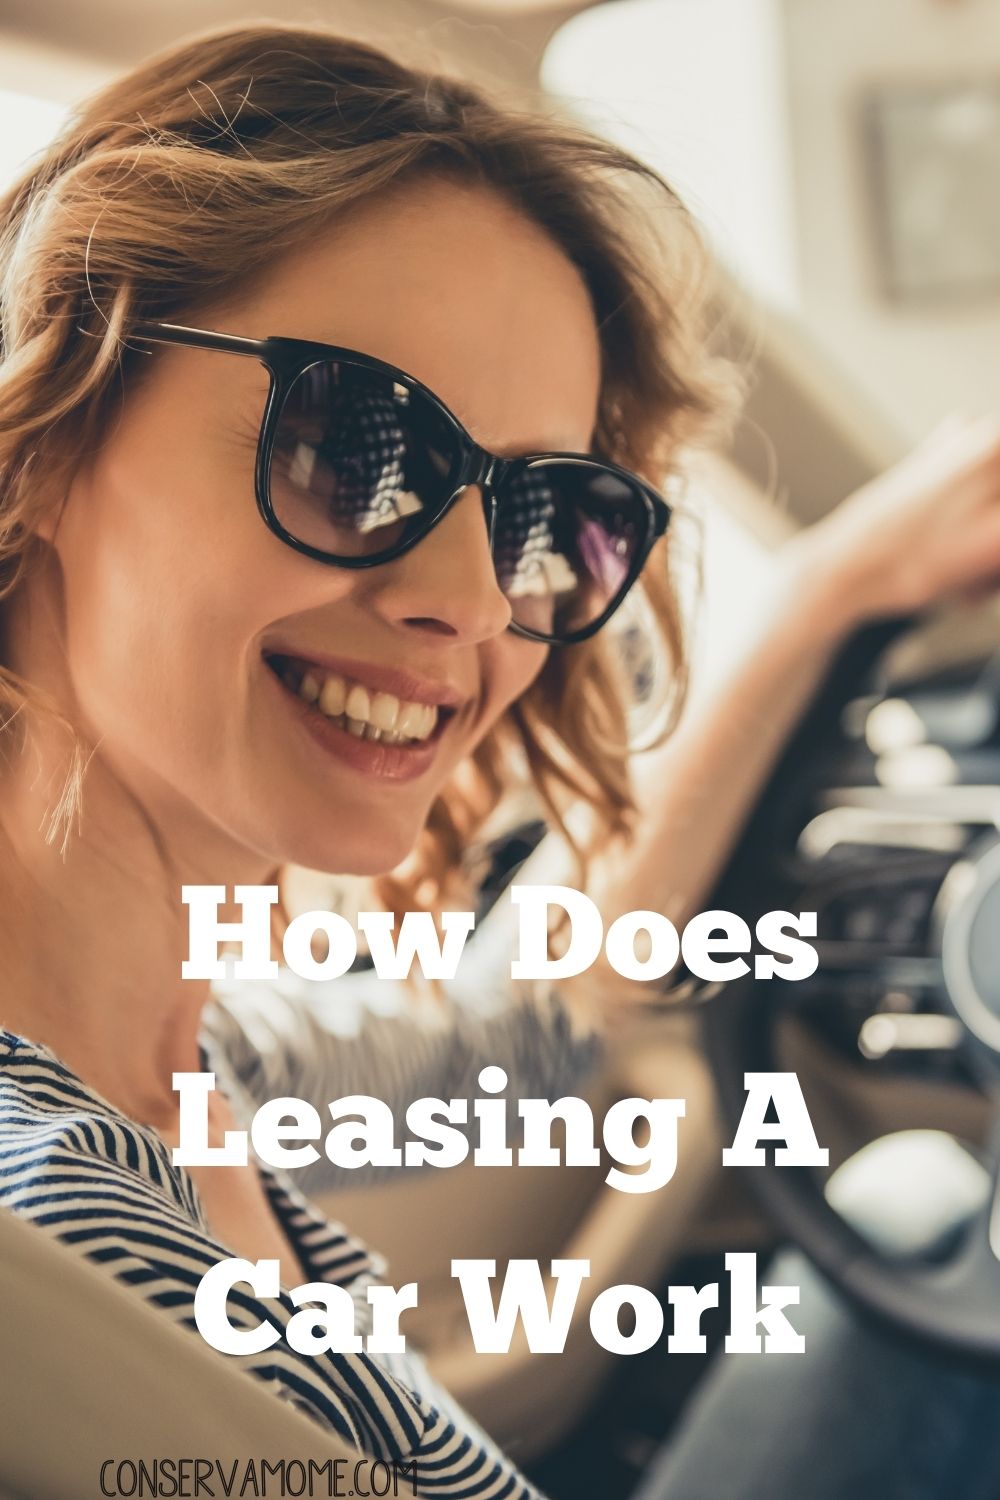 How Does Leasing A Car Work